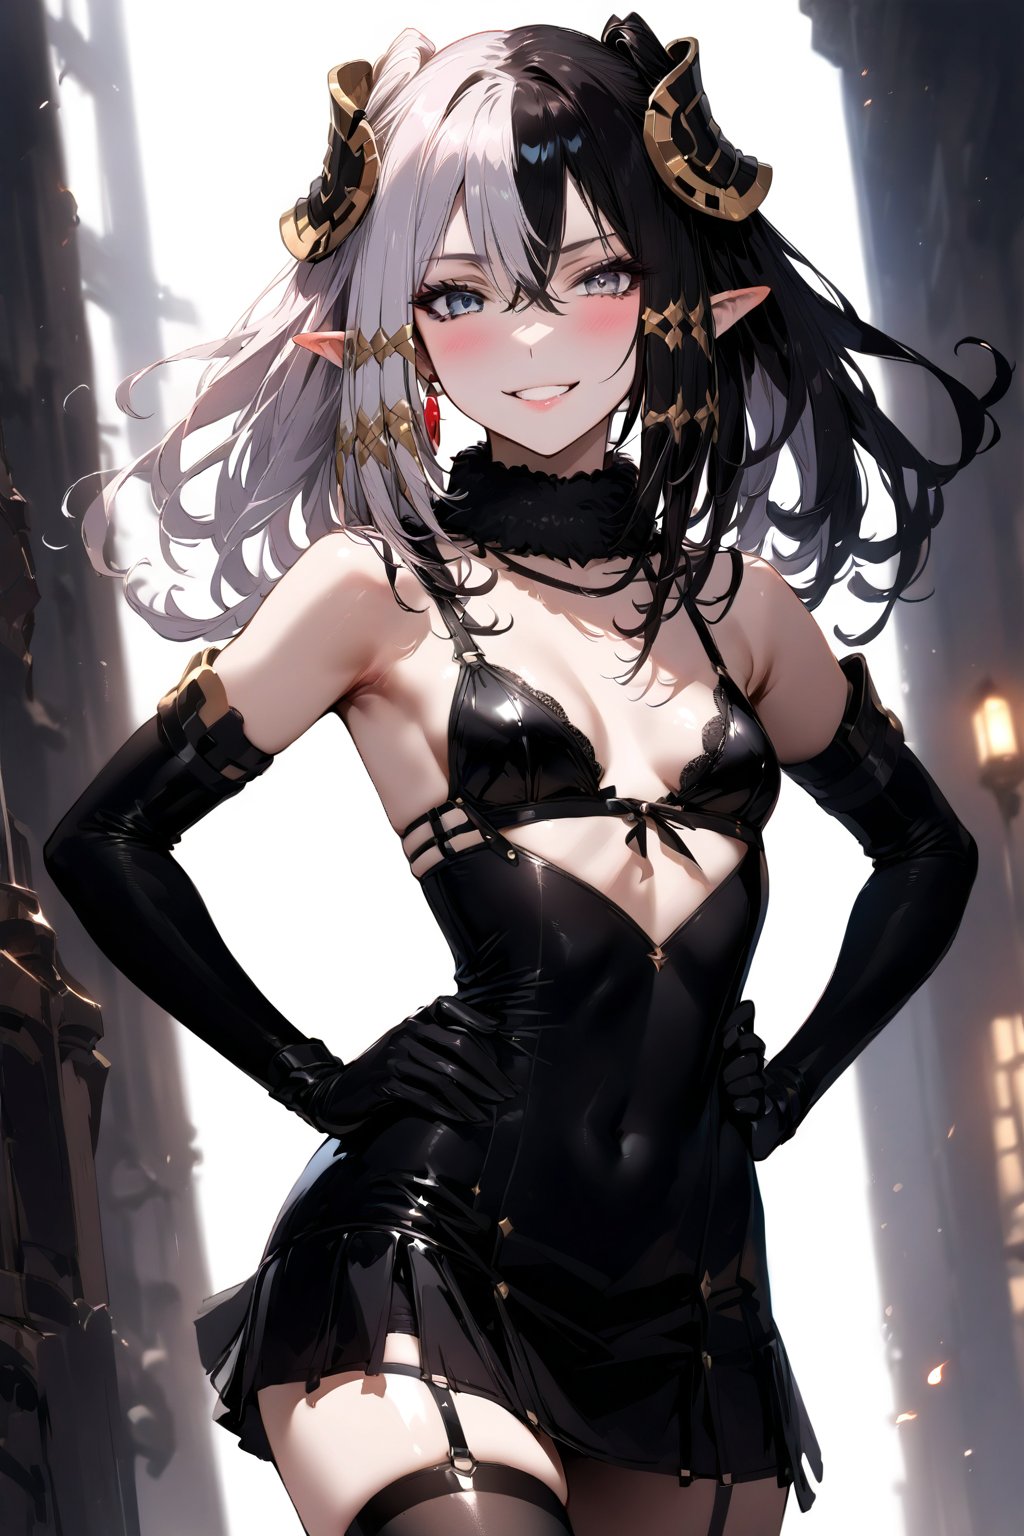 1 girl, alone, Antilene_Heran_Fouche \(overlord\), 1girl, elf, long ears, black eyes, gray eyes, heterochromia, two-tone hair, hair between eyes, bangs, small breasts, shiny hair, eyelashes, makeup, lipstick , lips, black lingerie, bra, thigh-high stockings, elbow-length gloves, choker, earrings, big smile, very happy, incredibly happy, very blushing, blushing face, masterful work of art, incredibly detailed, top quality, beautiful, standing, with hands on hips.